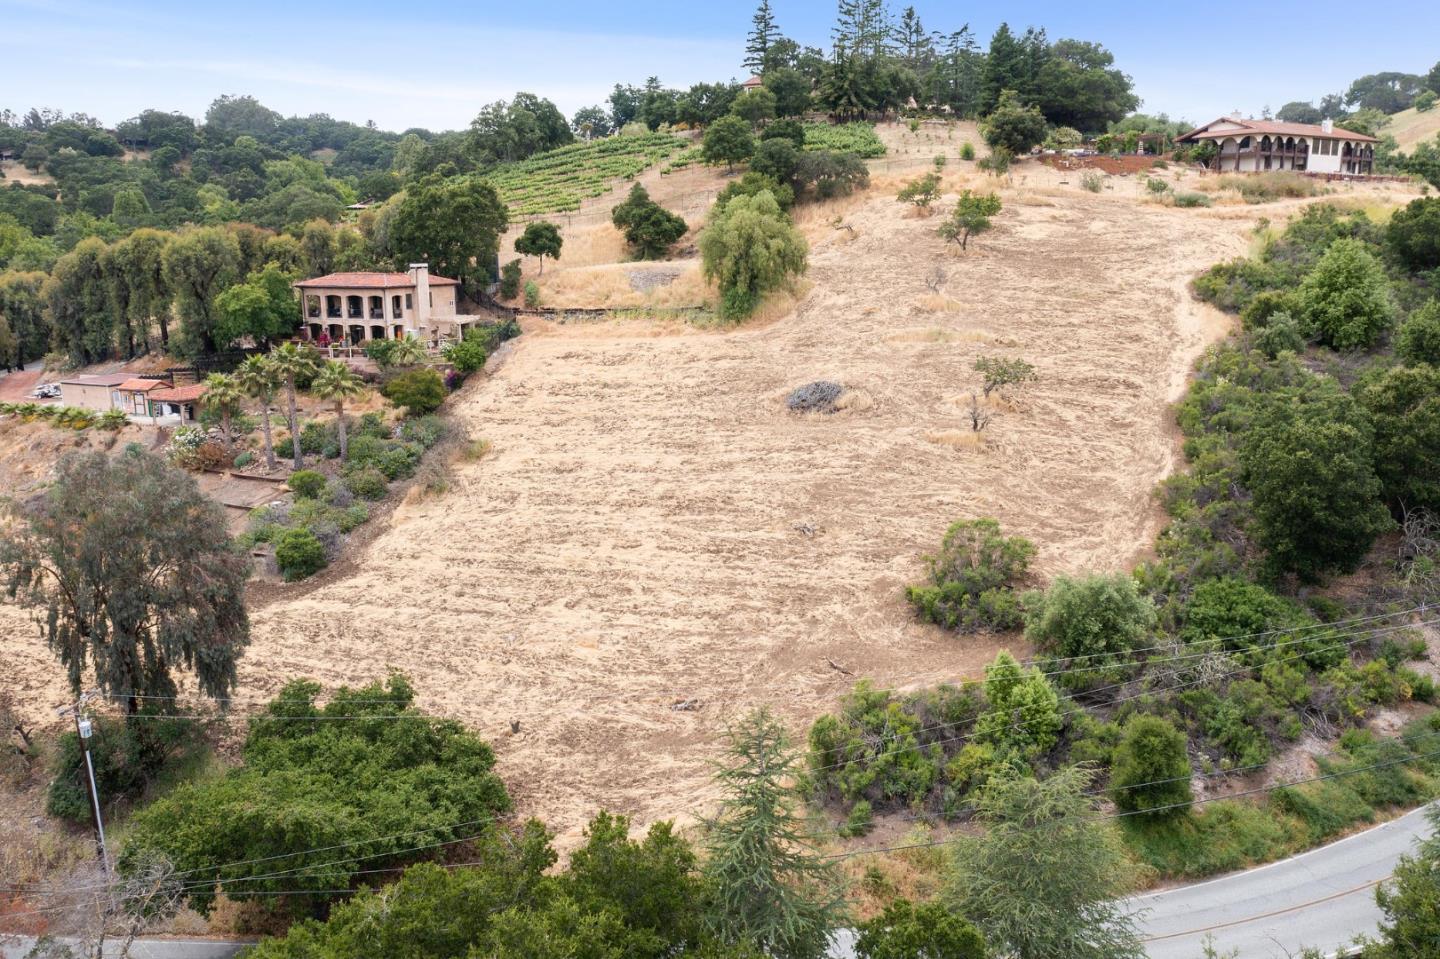 14721 Shannon Rd, Los Gatos, California, 95032, United States, ,Land,For Sale,14721 Shannon Rd,1456252